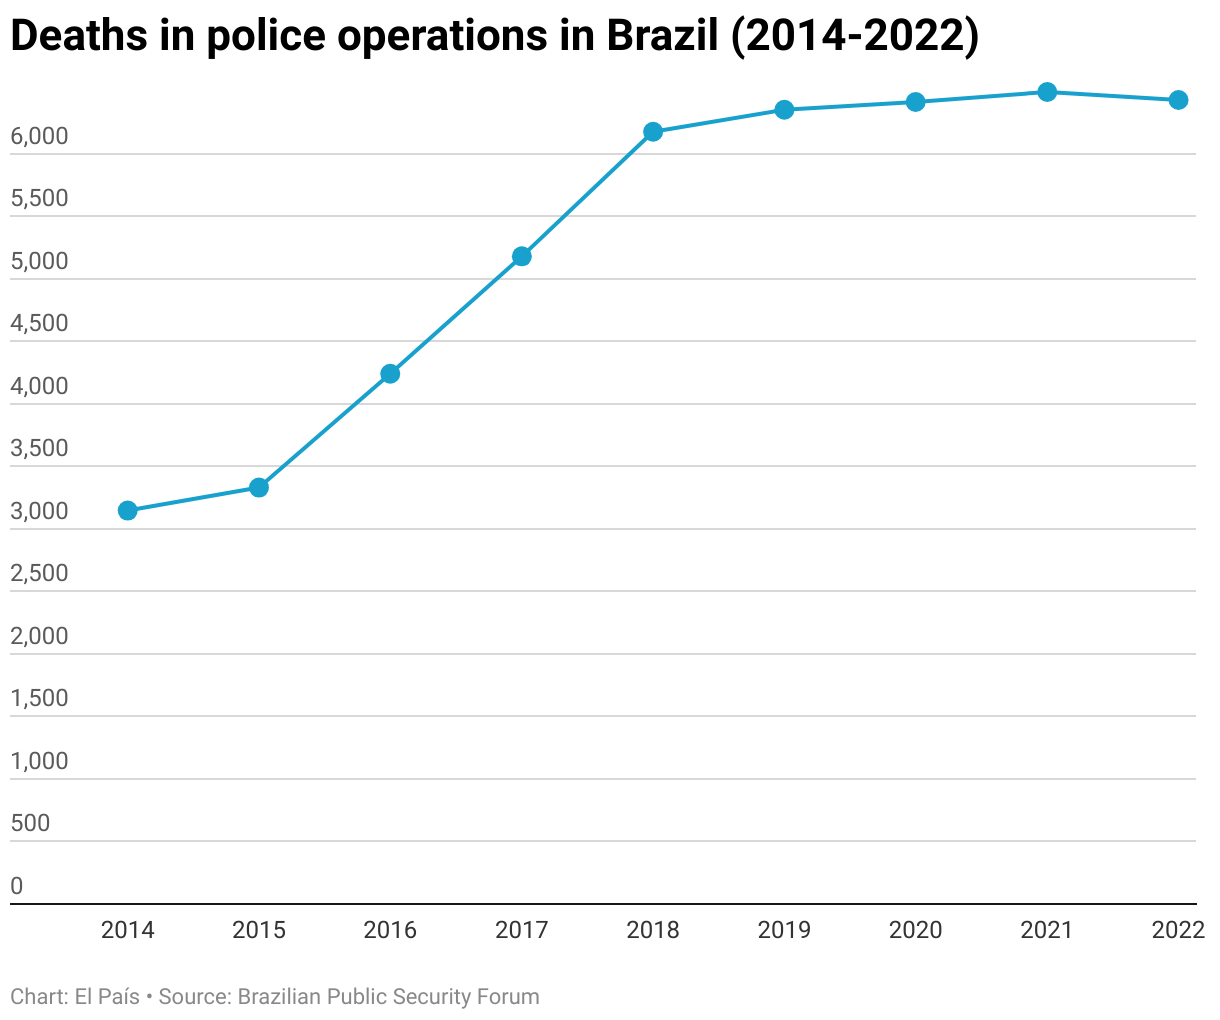 Total balance of deaths in police operations from 2014 to 2022.